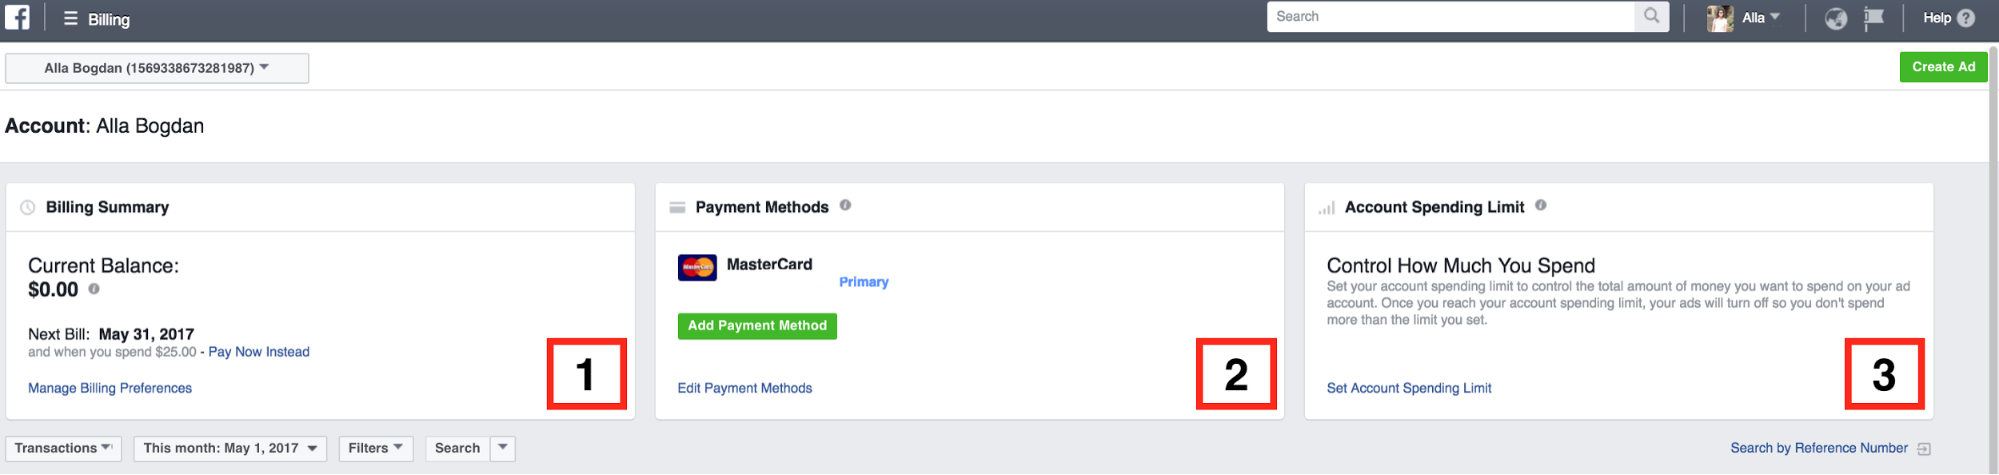 Facebook Ads billing and payment example